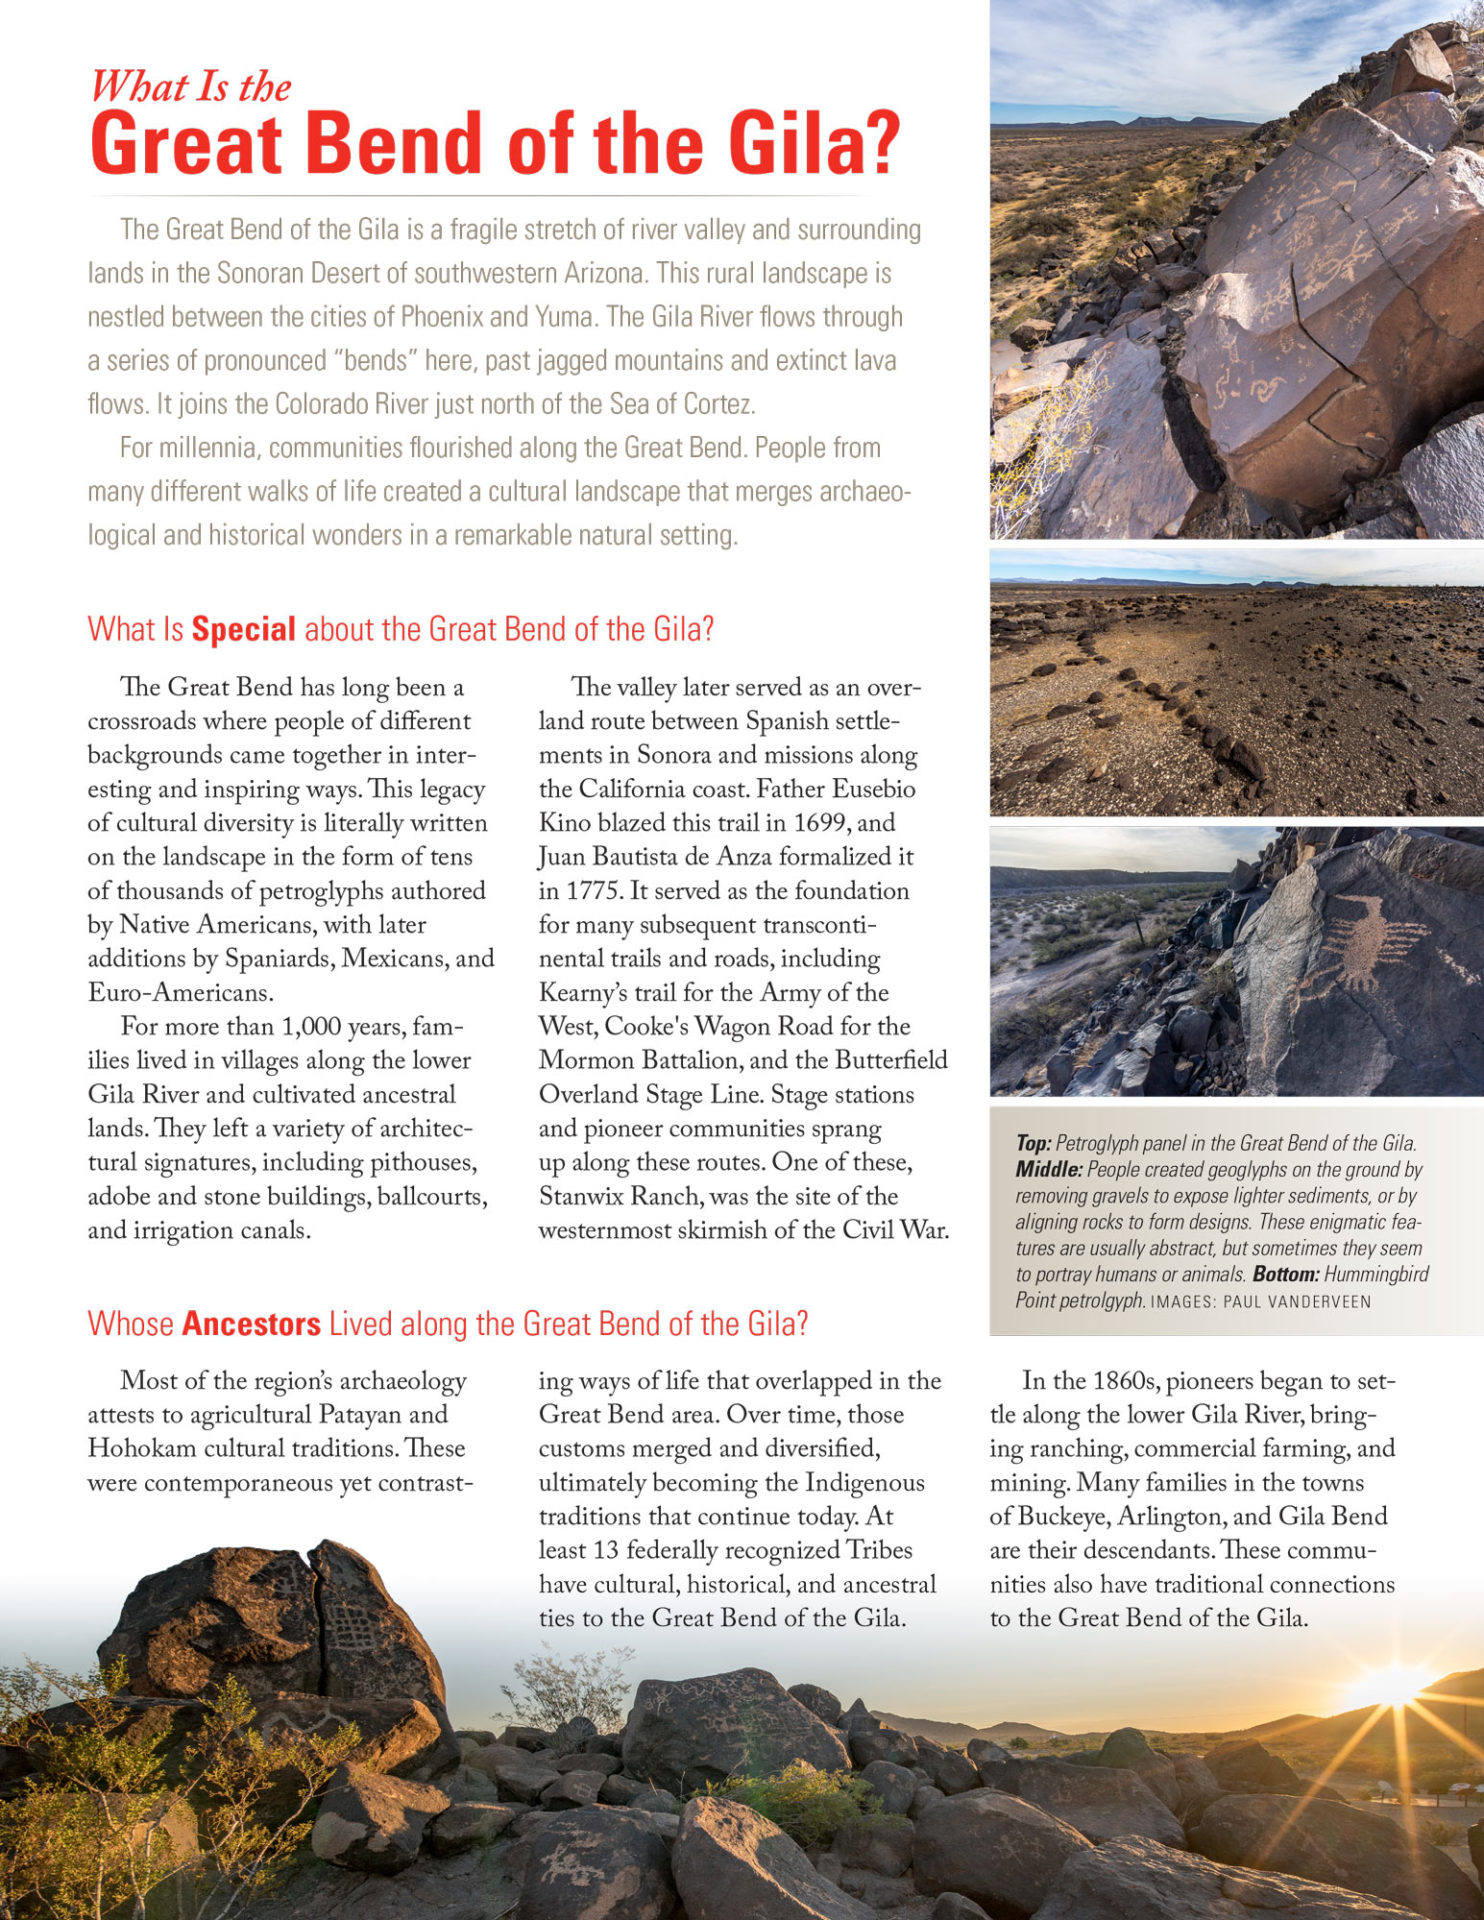 <a href="https://www.archaeologysouthwest.org/pdf/great-bend_fact_sheet_share.pdf">Download the Great Bend of the Gila Fact Sheet (3 MB)</a>